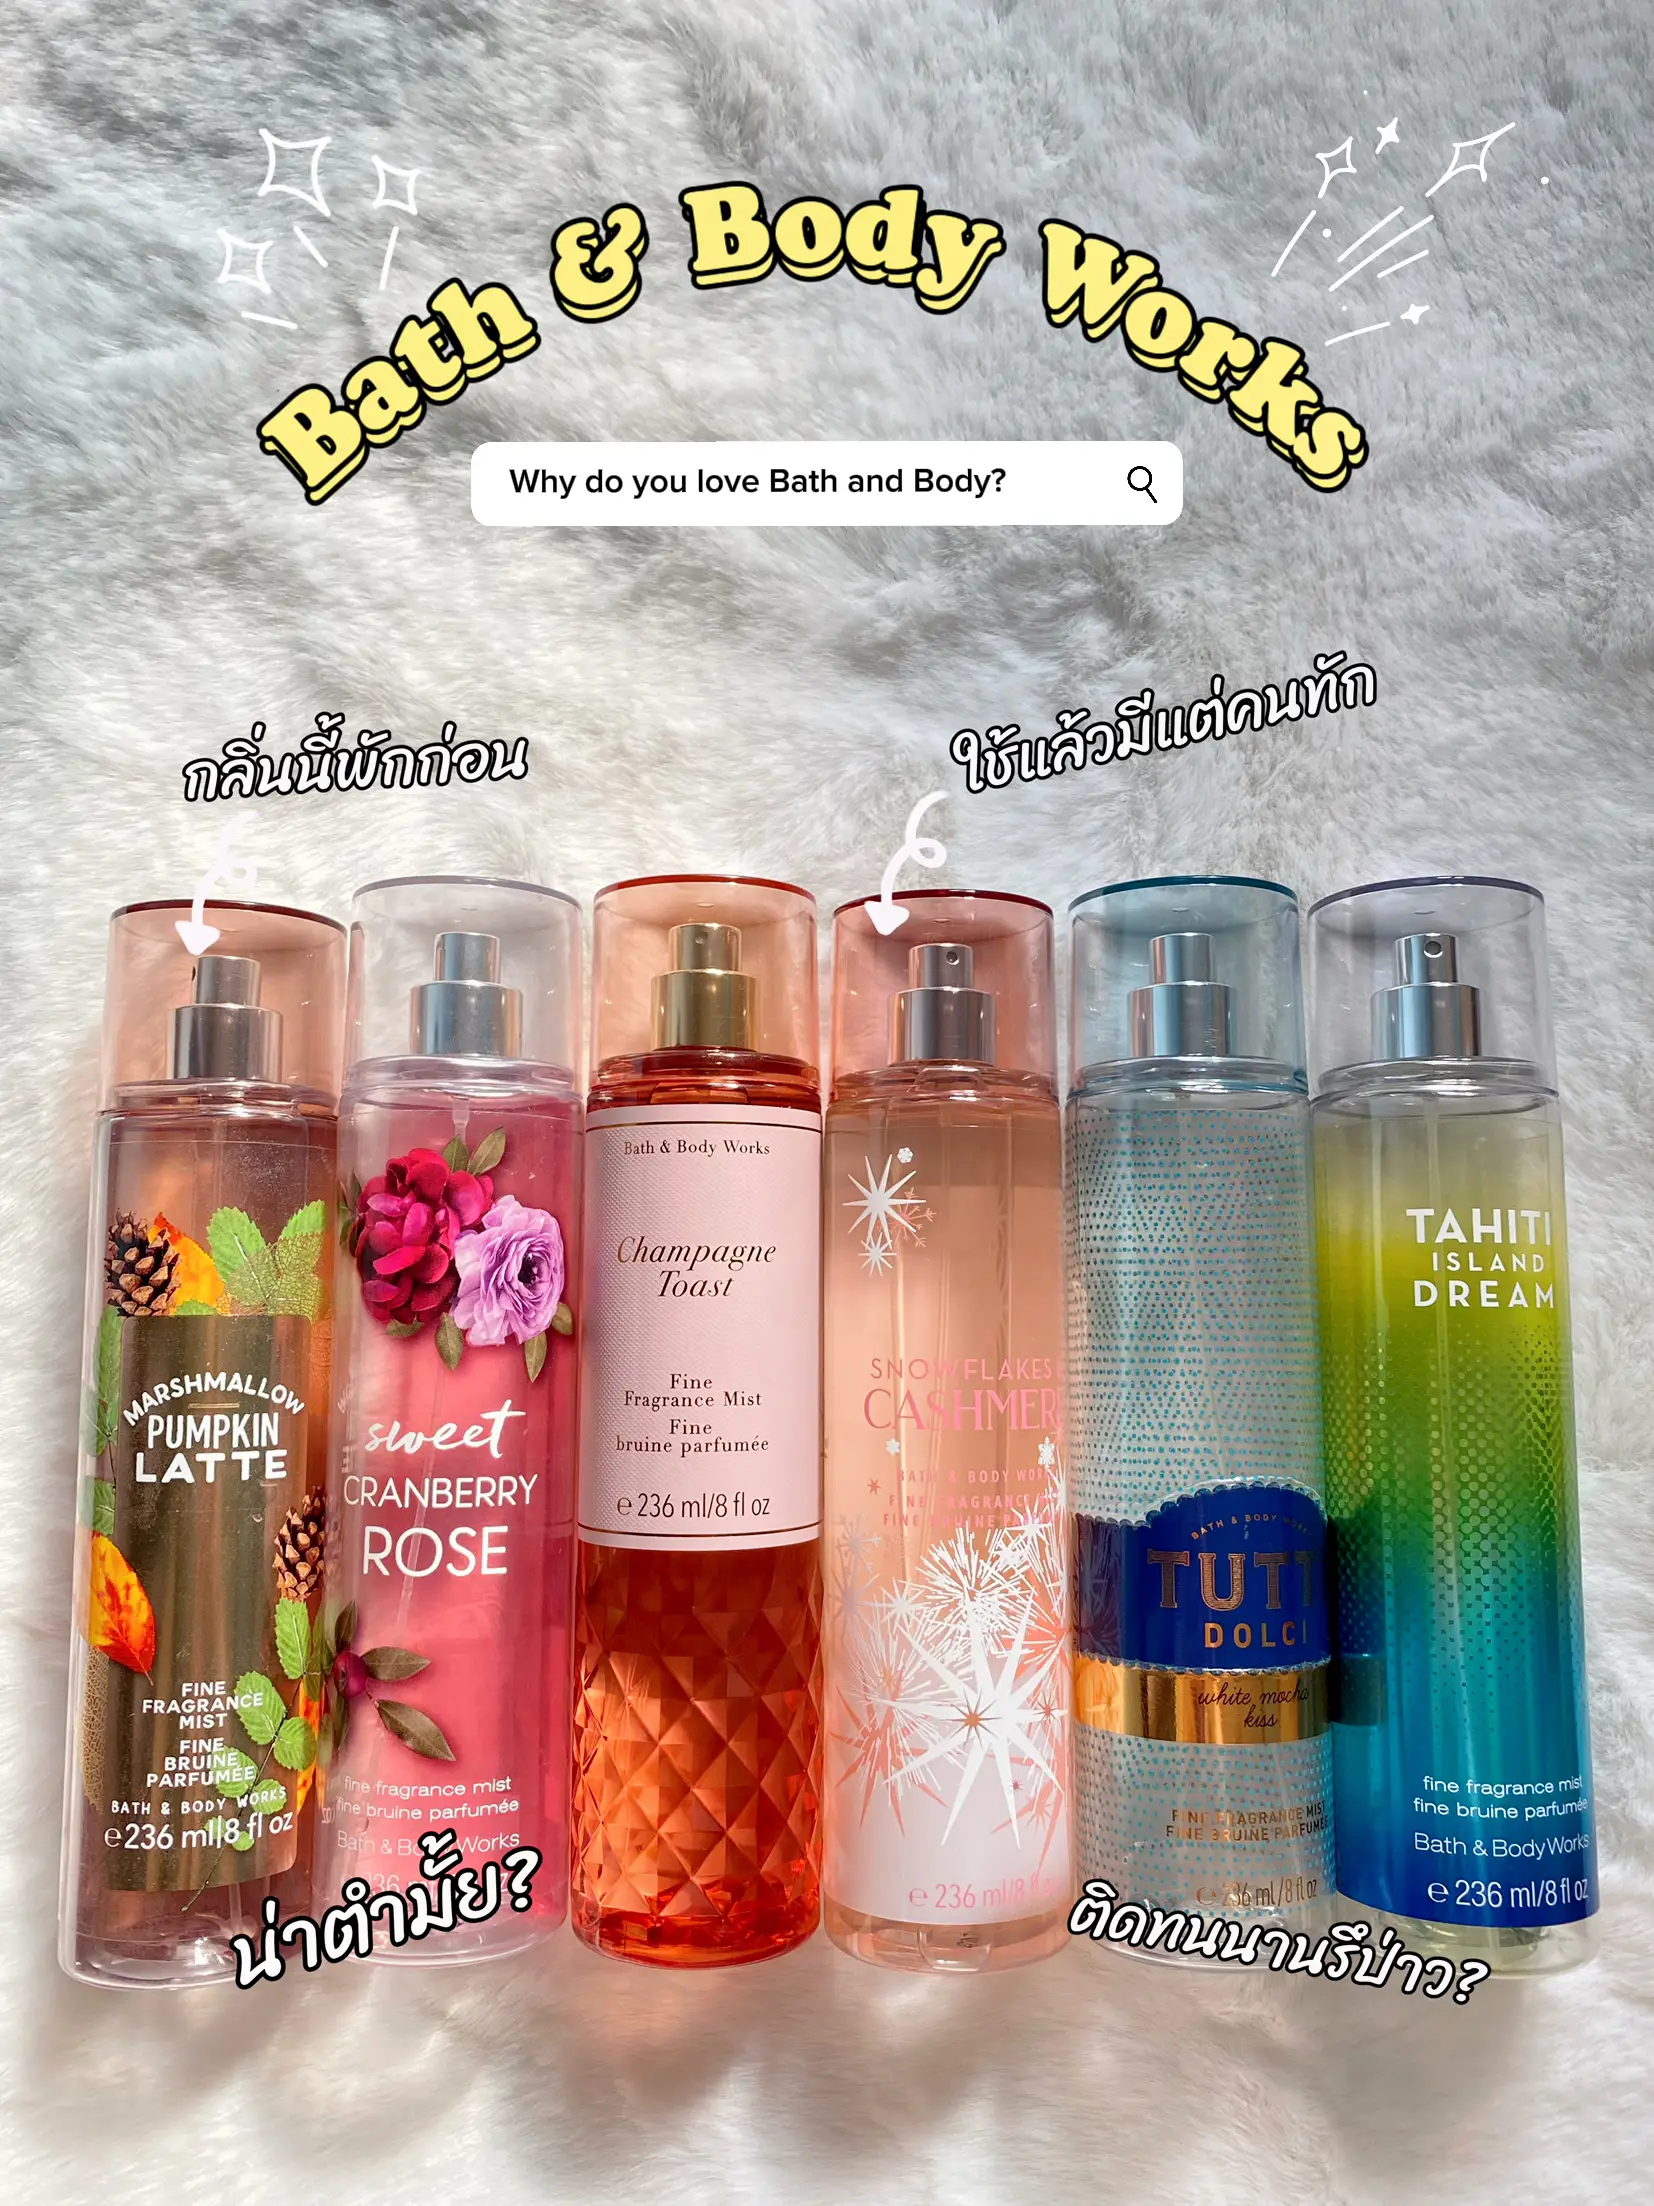 💥Open the children's group Bath and Body works. Really hurt., Gallery  posted by faipatsie